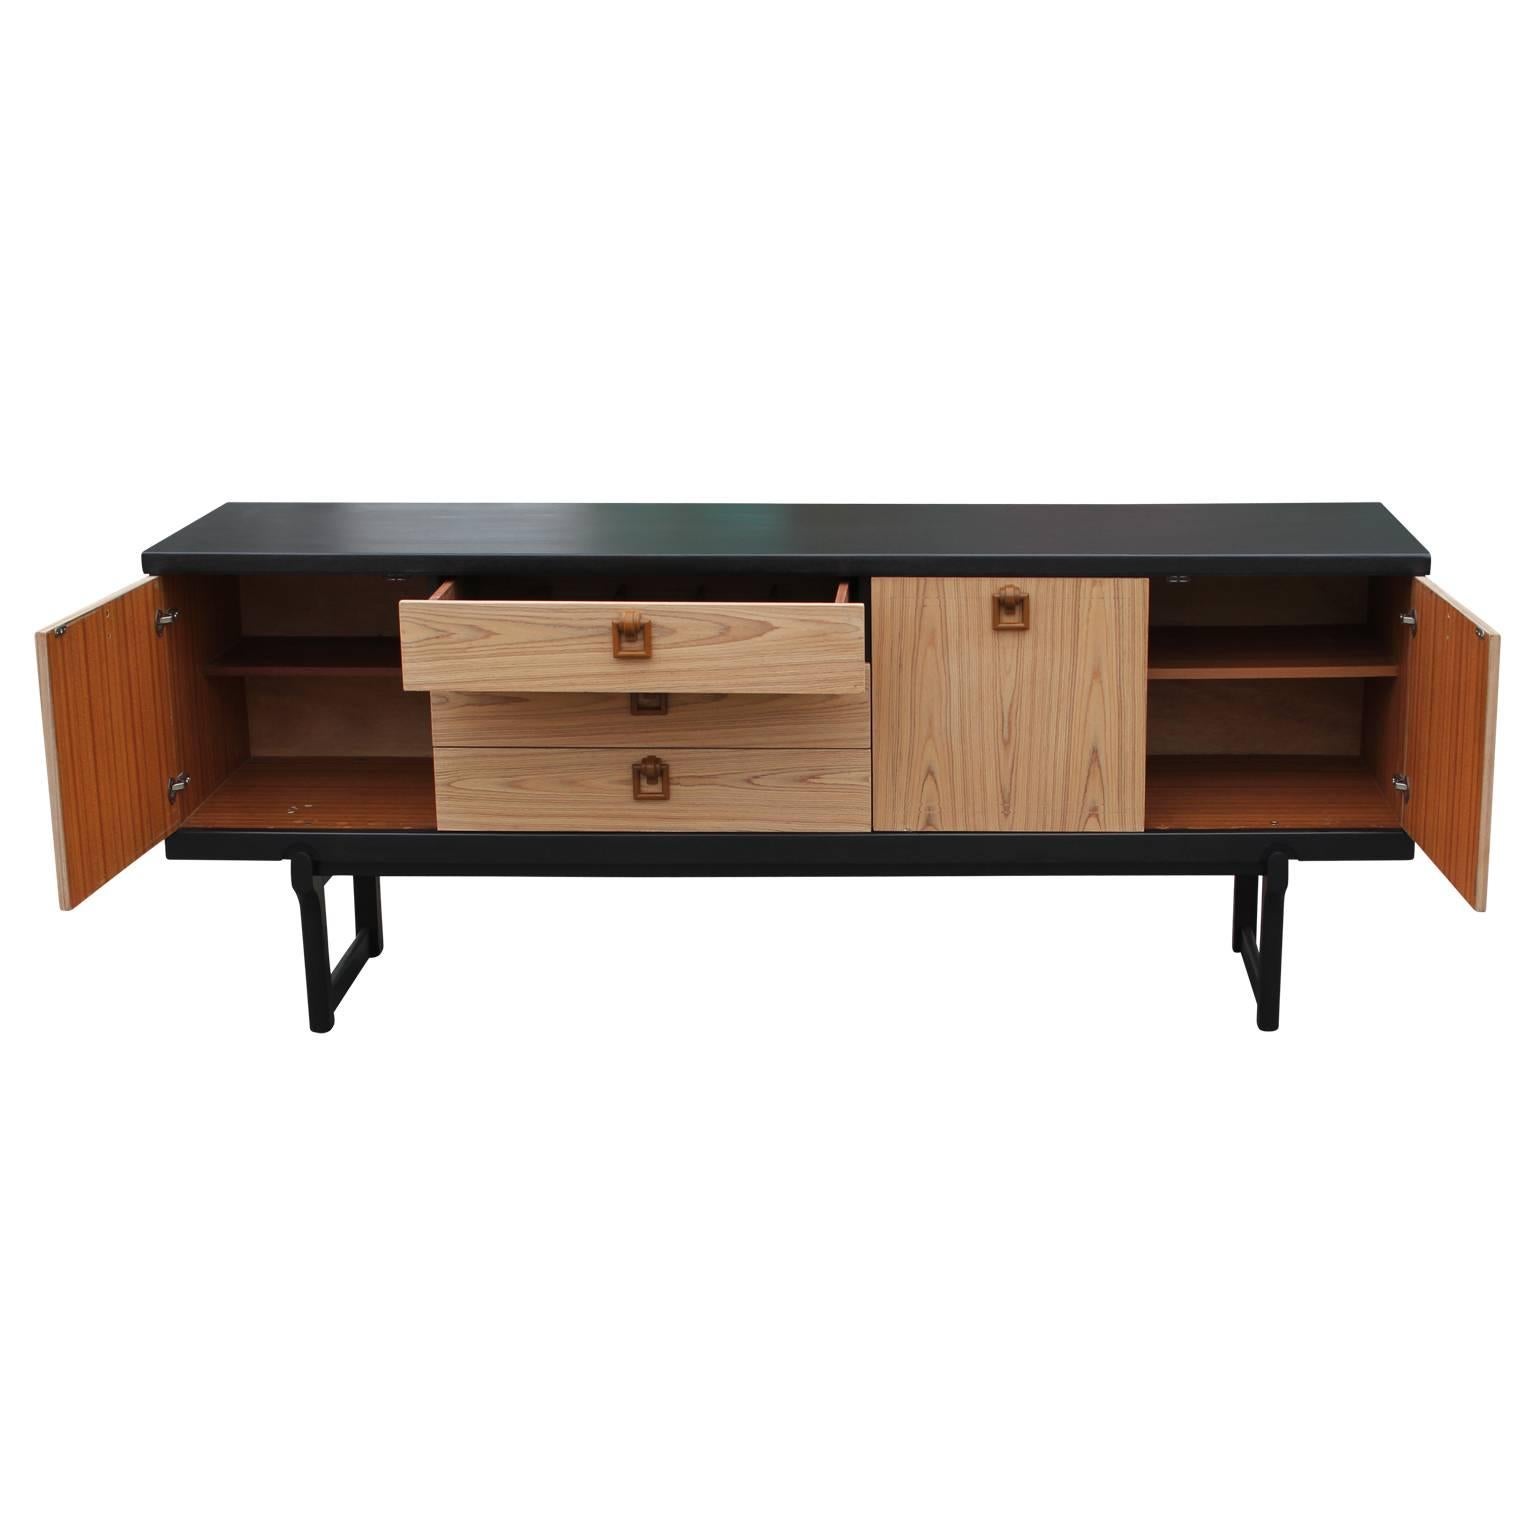 Mid-Century Modern Modern Two-Tone Bleached and Charcoal Credenza/Sideboard with Bakelite Handles